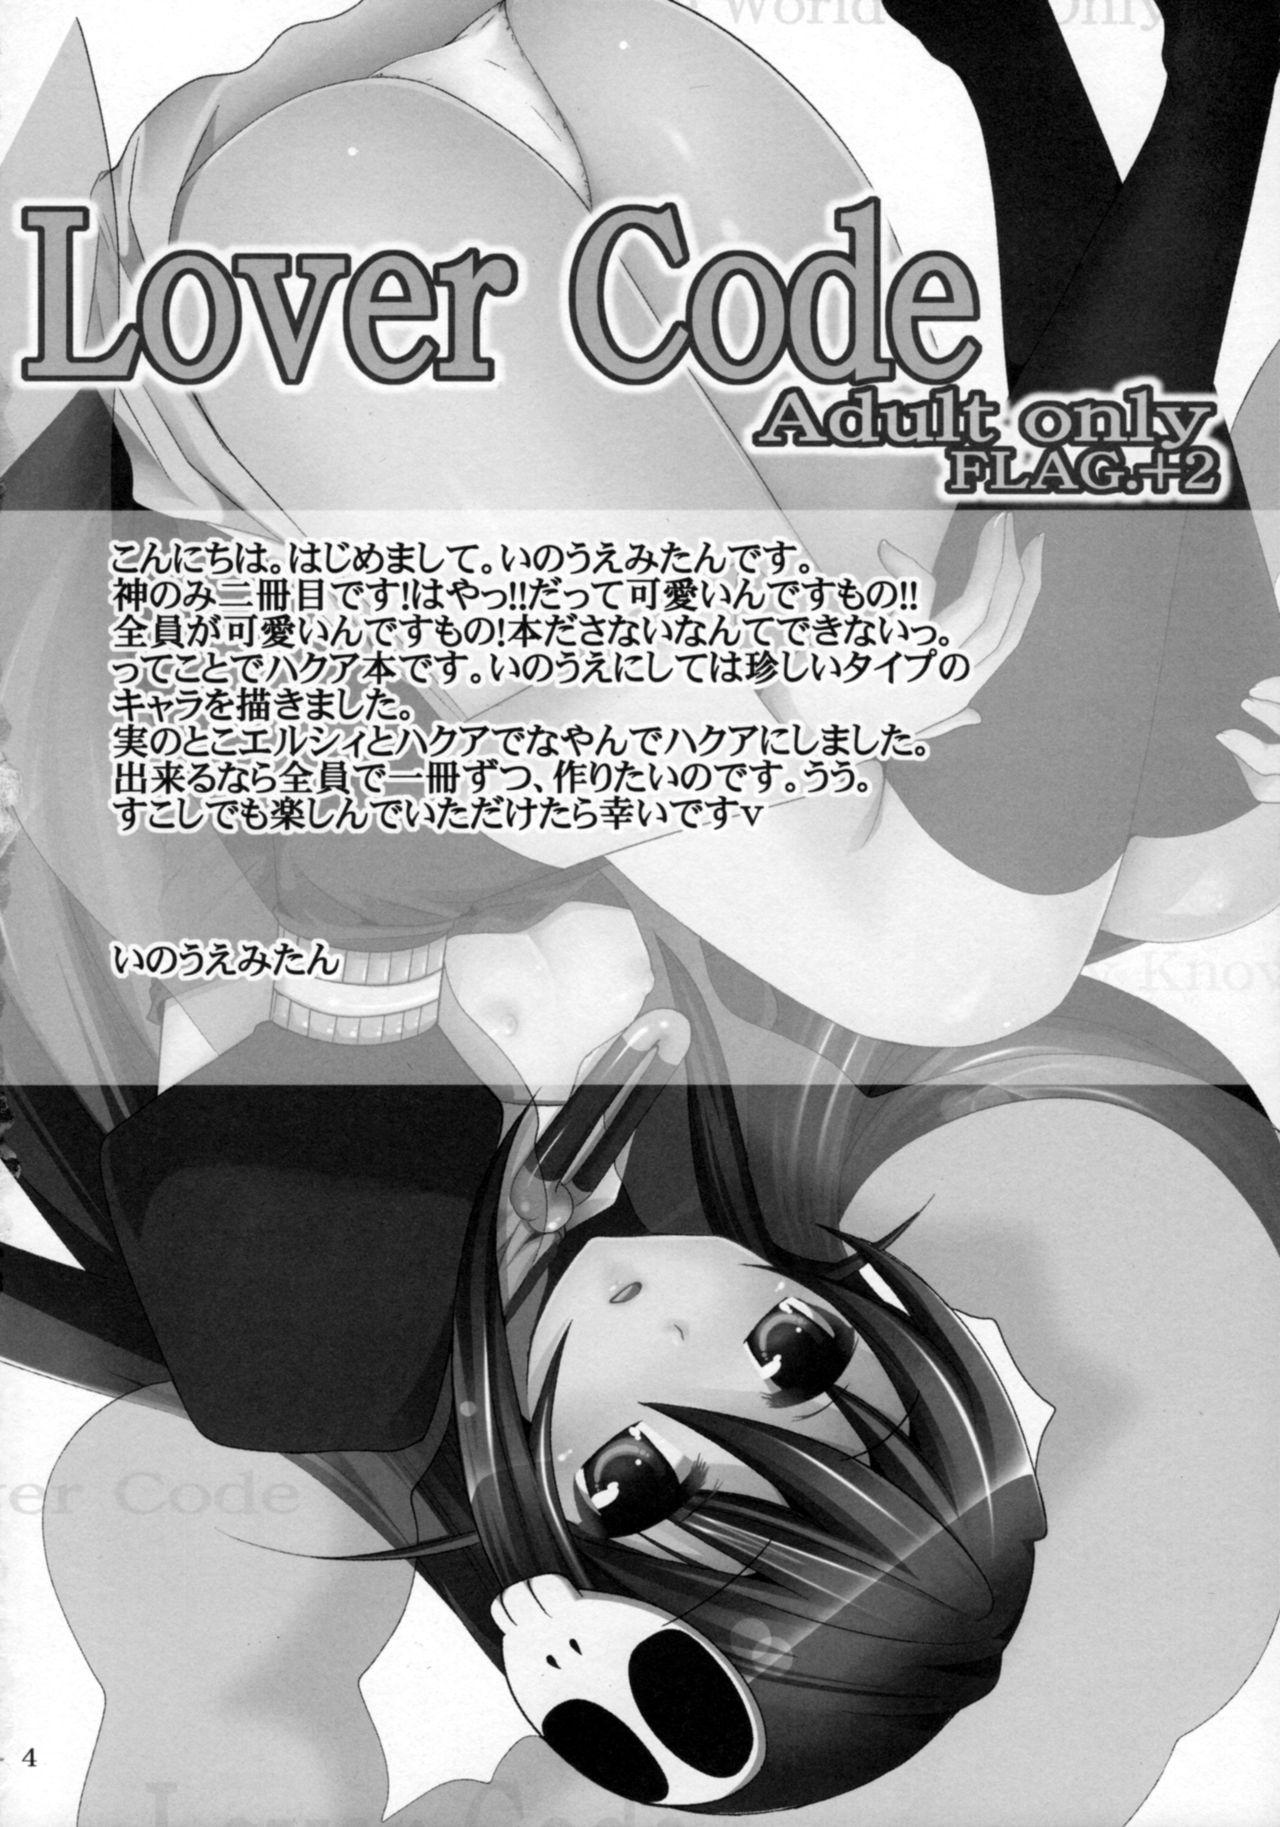 Skirt Lover Code - The world god only knows Lesbian Porn - Page 3